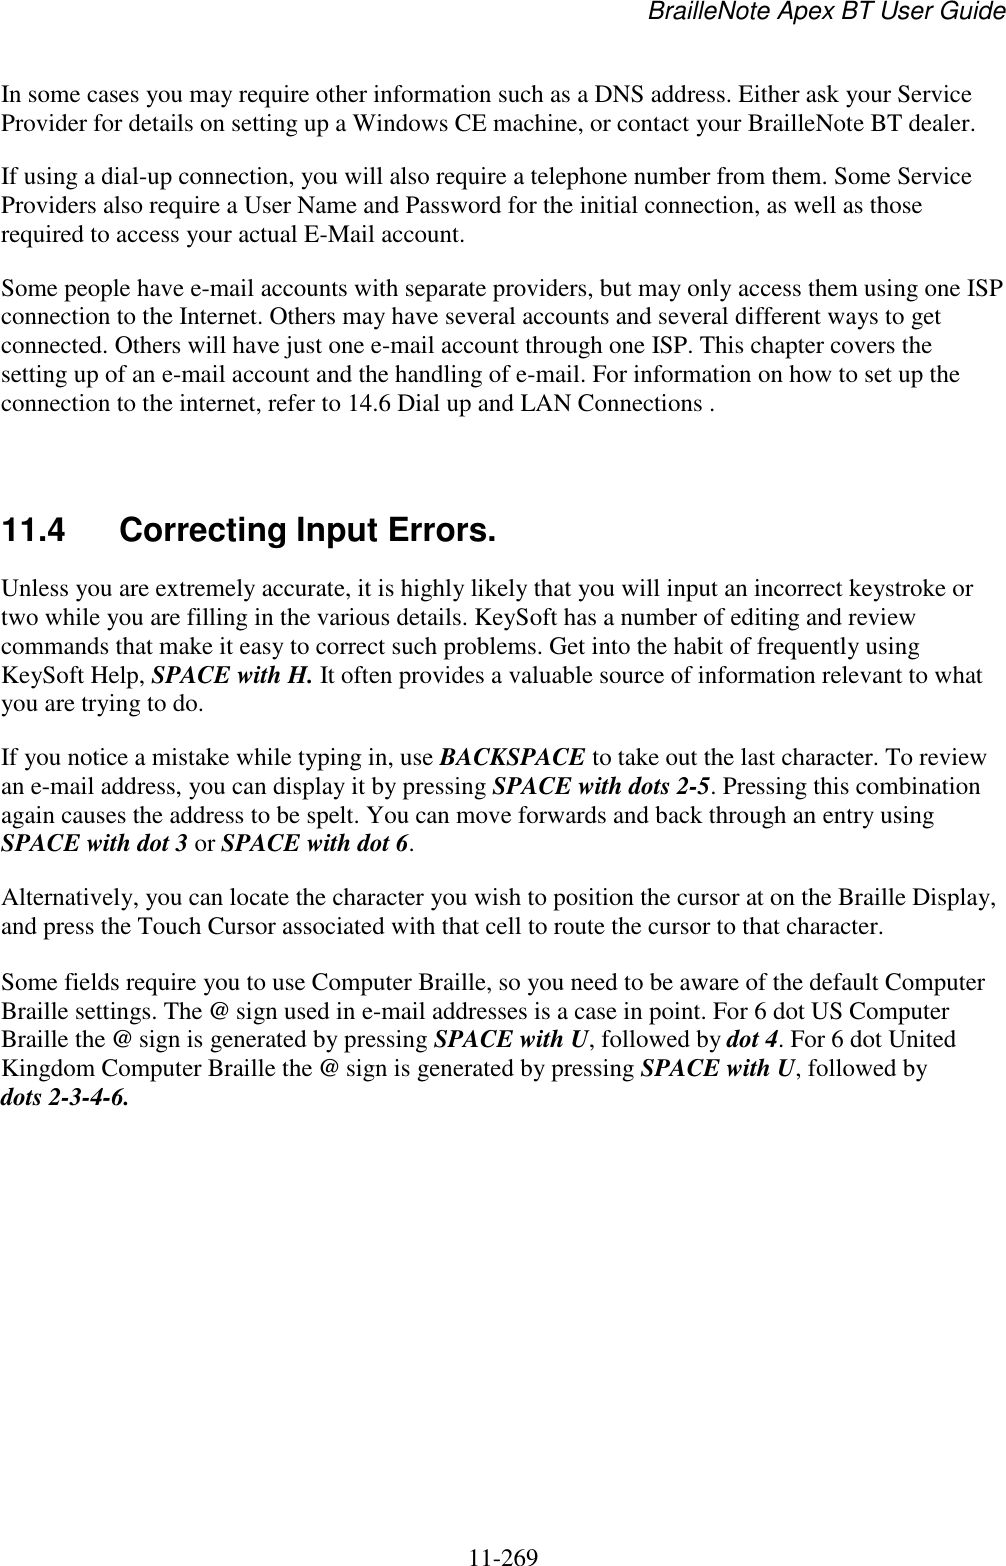 BrailleNote Apex BT User Guide   11-269   In some cases you may require other information such as a DNS address. Either ask your Service Provider for details on setting up a Windows CE machine, or contact your BrailleNote BT dealer. If using a dial-up connection, you will also require a telephone number from them. Some Service Providers also require a User Name and Password for the initial connection, as well as those required to access your actual E-Mail account. Some people have e-mail accounts with separate providers, but may only access them using one ISP connection to the Internet. Others may have several accounts and several different ways to get connected. Others will have just one e-mail account through one ISP. This chapter covers the setting up of an e-mail account and the handling of e-mail. For information on how to set up the connection to the internet, refer to 14.6 Dial up and LAN Connections .   11.4  Correcting Input Errors. Unless you are extremely accurate, it is highly likely that you will input an incorrect keystroke or two while you are filling in the various details. KeySoft has a number of editing and review commands that make it easy to correct such problems. Get into the habit of frequently using KeySoft Help, SPACE with H. It often provides a valuable source of information relevant to what you are trying to do. If you notice a mistake while typing in, use BACKSPACE to take out the last character. To review an e-mail address, you can display it by pressing SPACE with dots 2-5. Pressing this combination again causes the address to be spelt. You can move forwards and back through an entry using SPACE with dot 3 or SPACE with dot 6. Alternatively, you can locate the character you wish to position the cursor at on the Braille Display, and press the Touch Cursor associated with that cell to route the cursor to that character.  Some fields require you to use Computer Braille, so you need to be aware of the default Computer Braille settings. The @ sign used in e-mail addresses is a case in point. For 6 dot US Computer Braille the @ sign is generated by pressing SPACE with U, followed by dot 4. For 6 dot United Kingdom Computer Braille the @ sign is generated by pressing SPACE with U, followed by dots 2-3-4-6.   